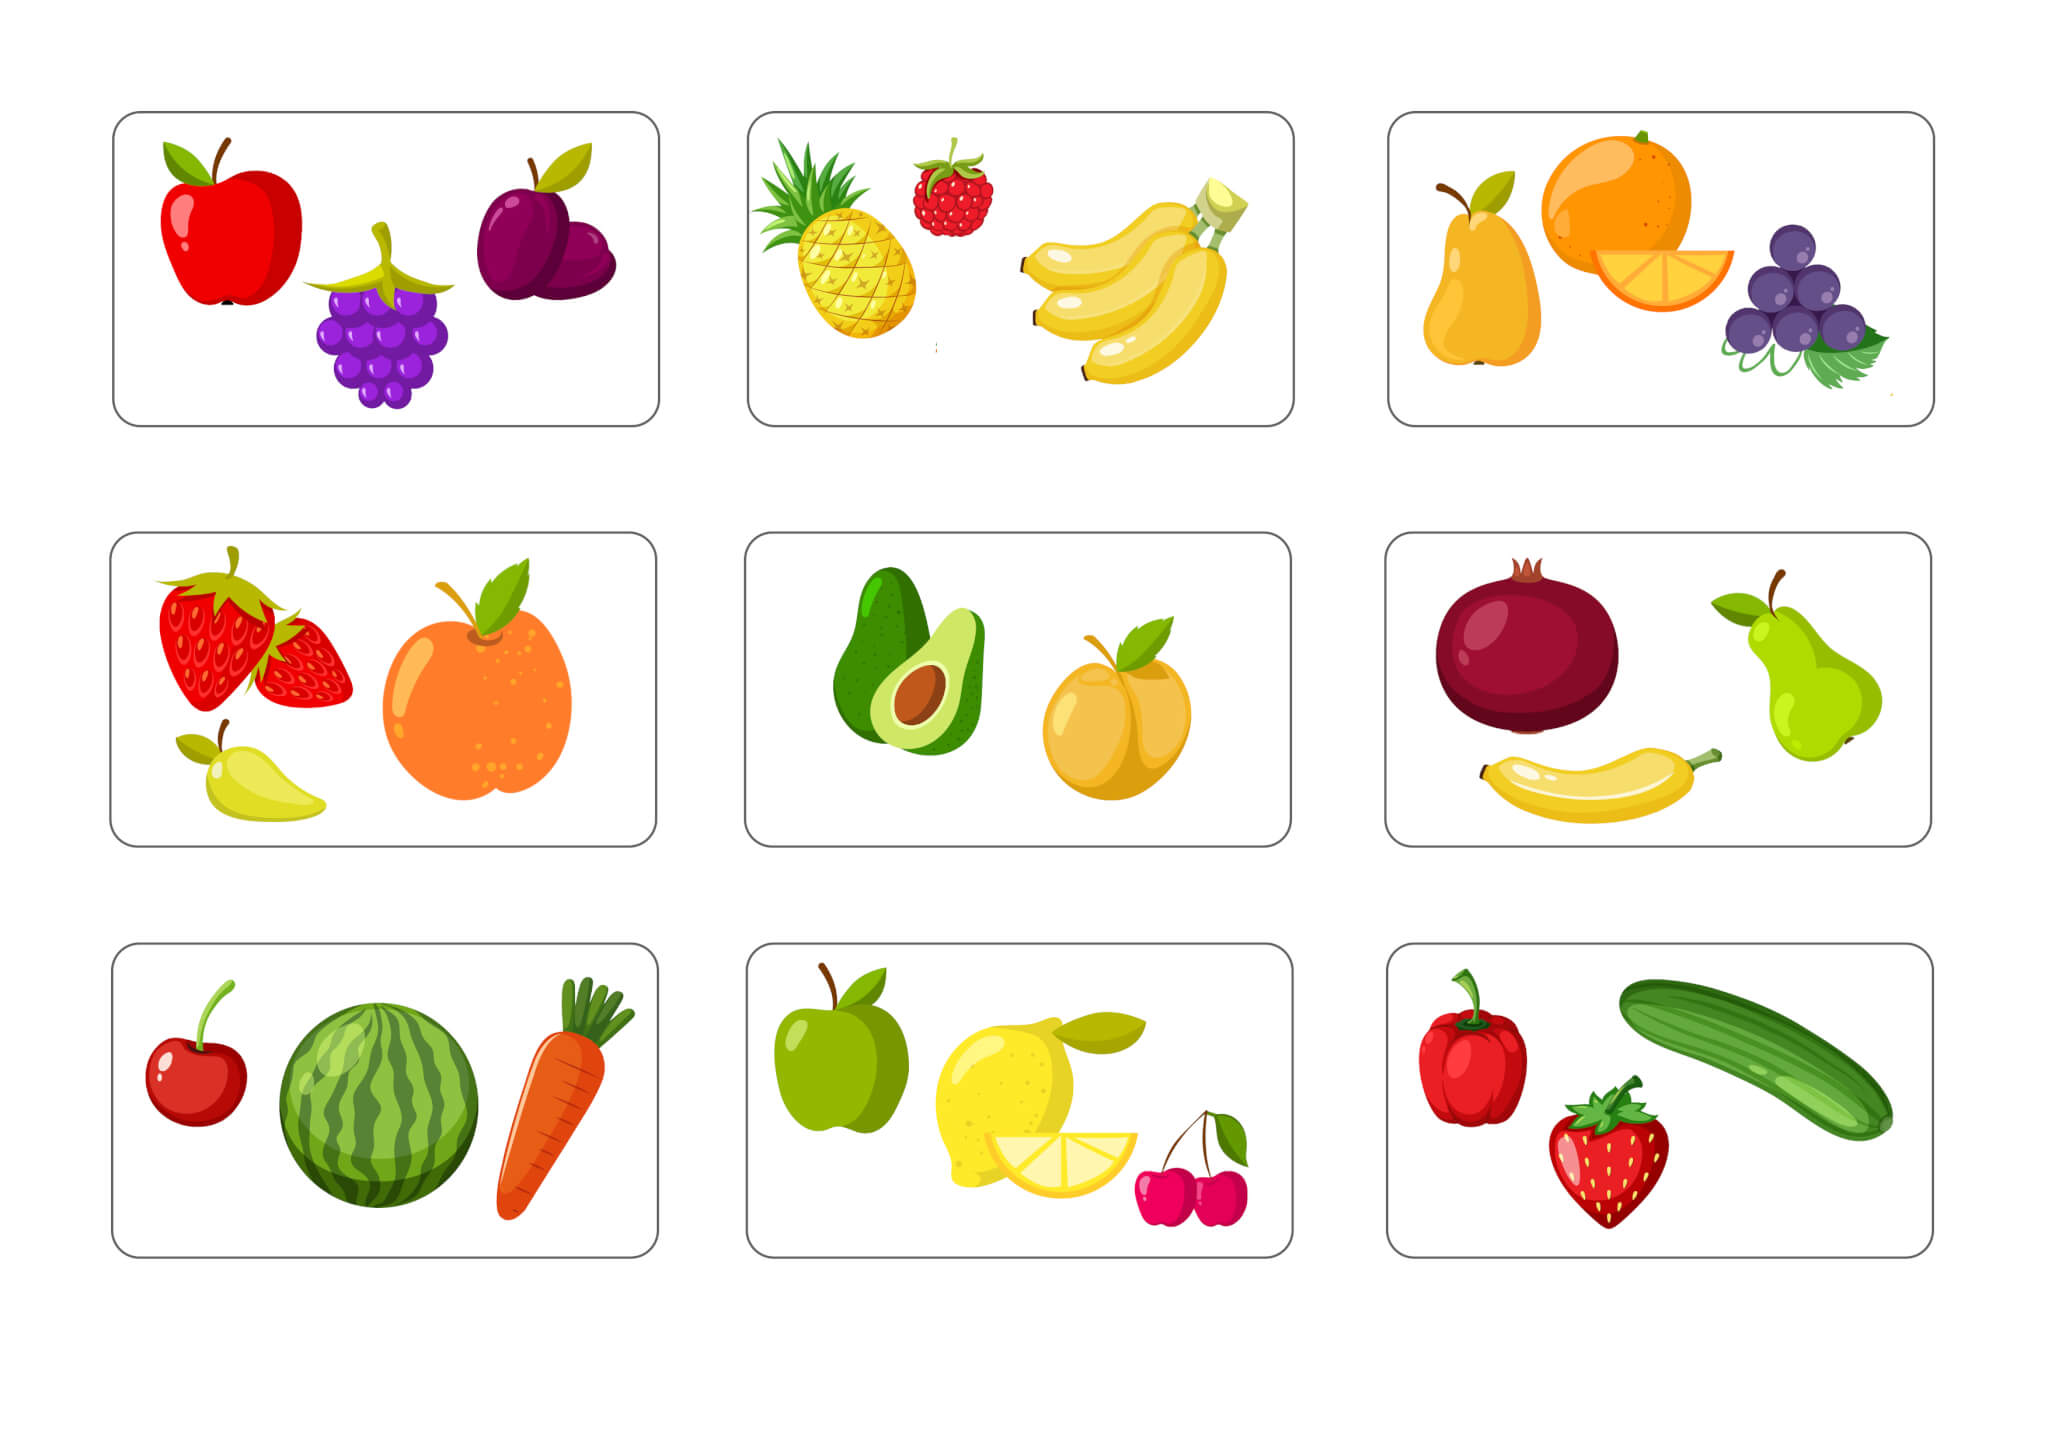 Shadow Match Game Fruits and Vegetables - Image 2